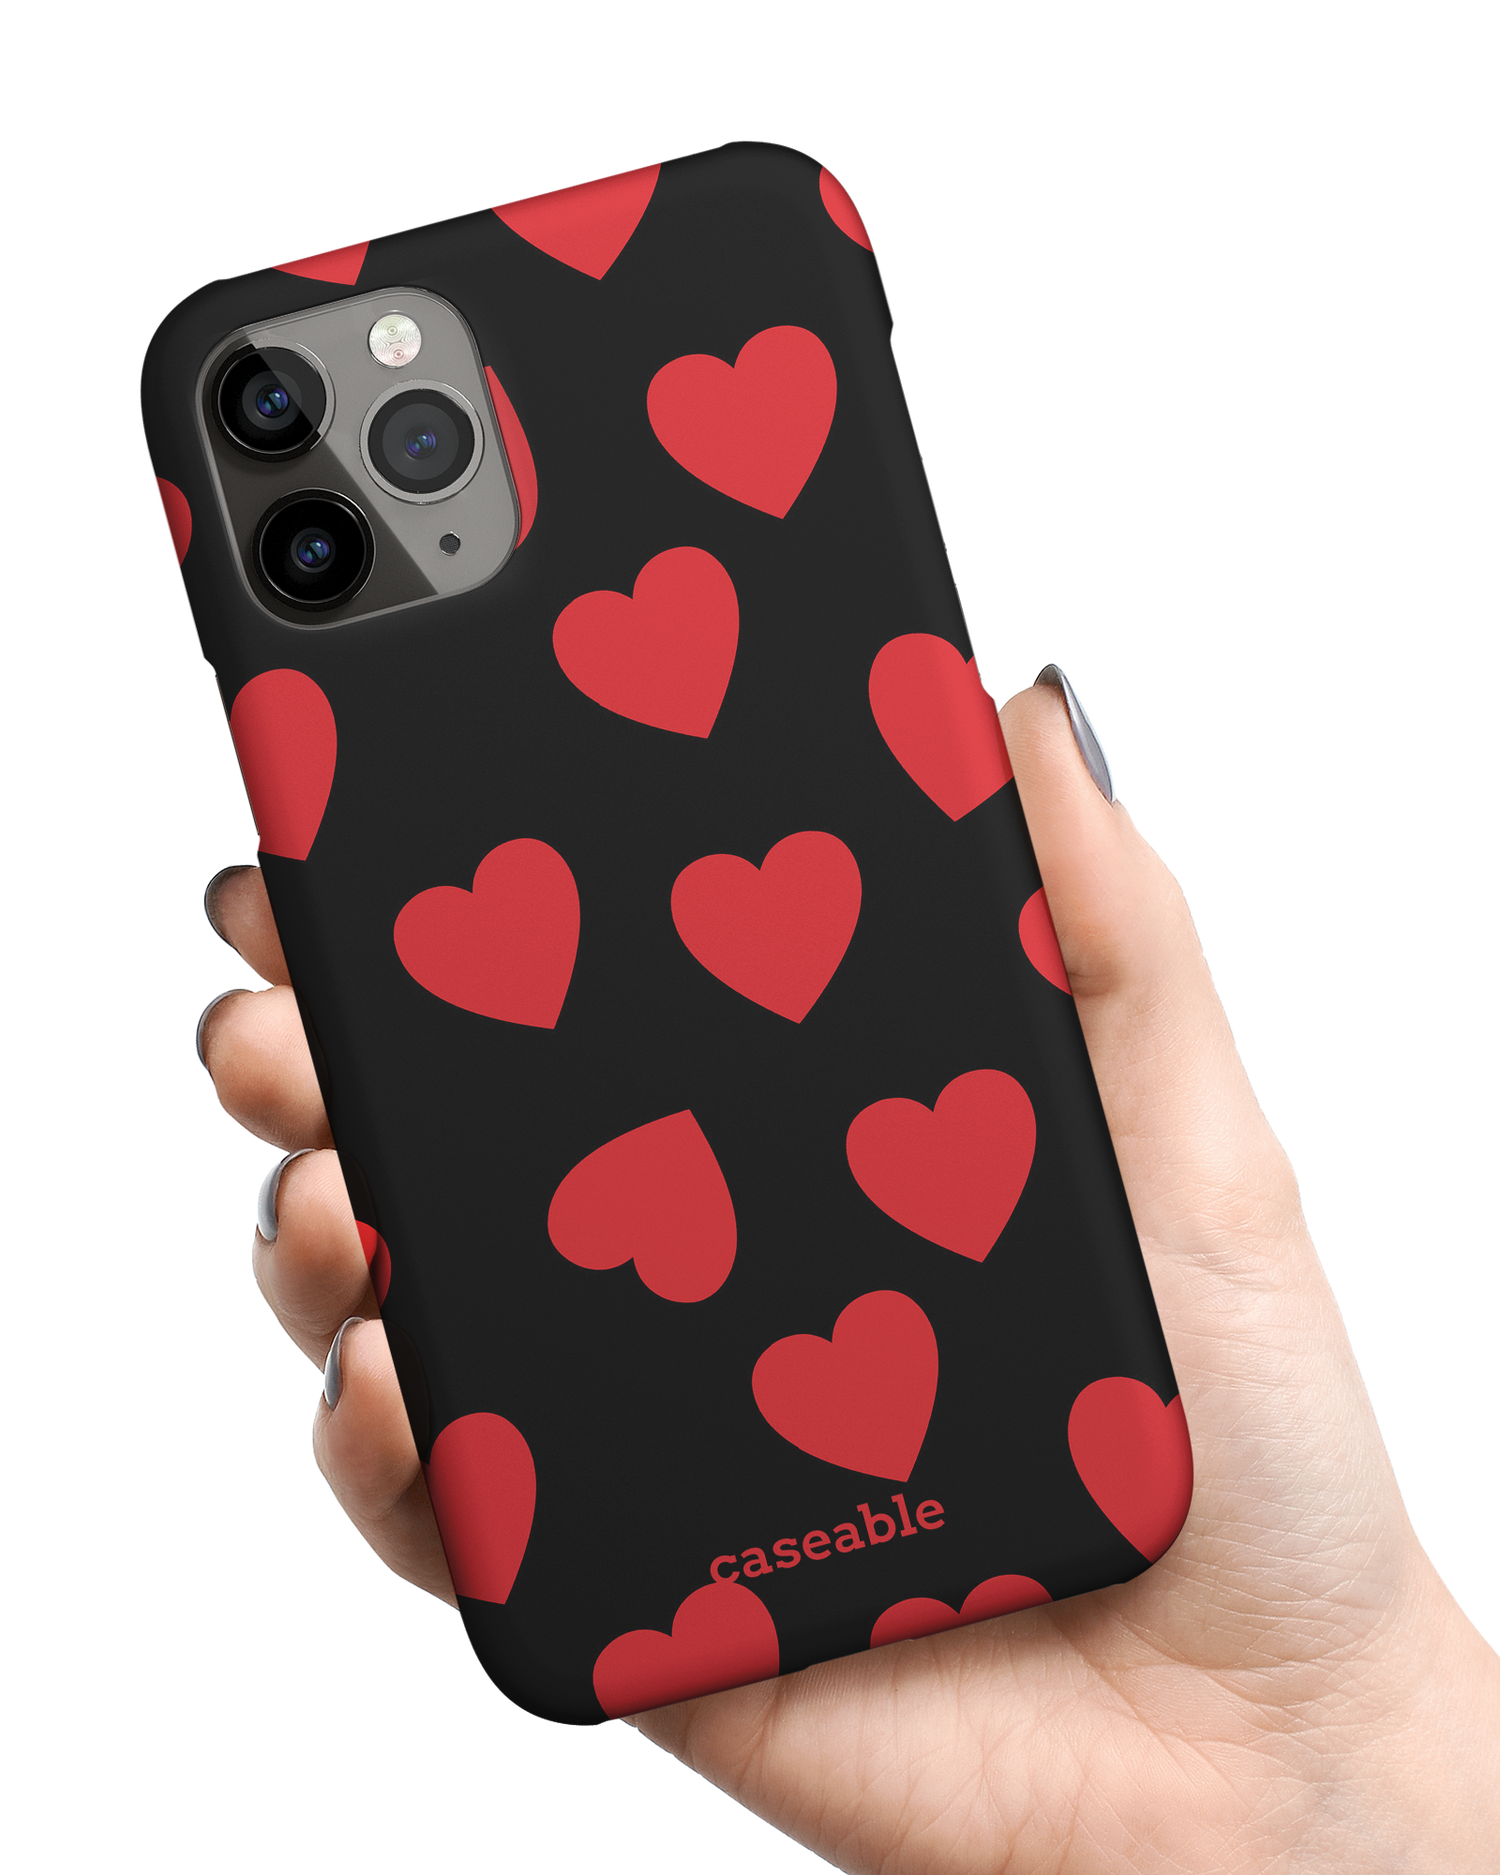 Repeating Hearts Hard Shell Phone Case Apple iPhone 11 Pro Max held in hand